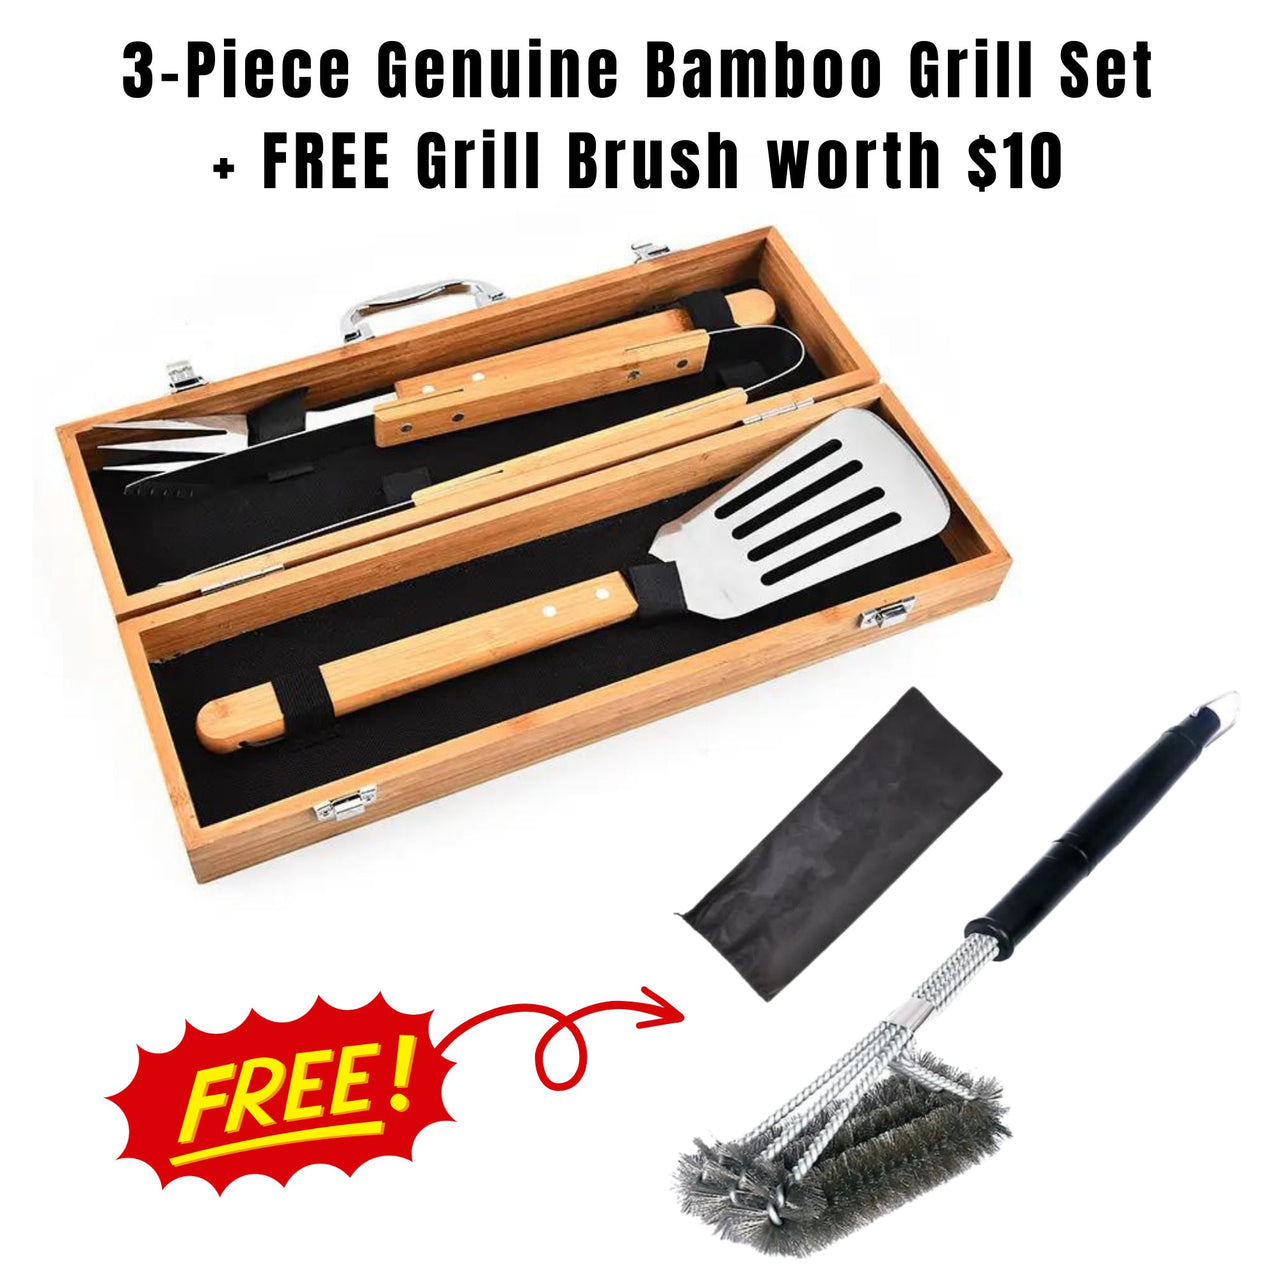 Premium Grill Gift - The Grill Master, The Man, The Myth, The Legend BBQ Set